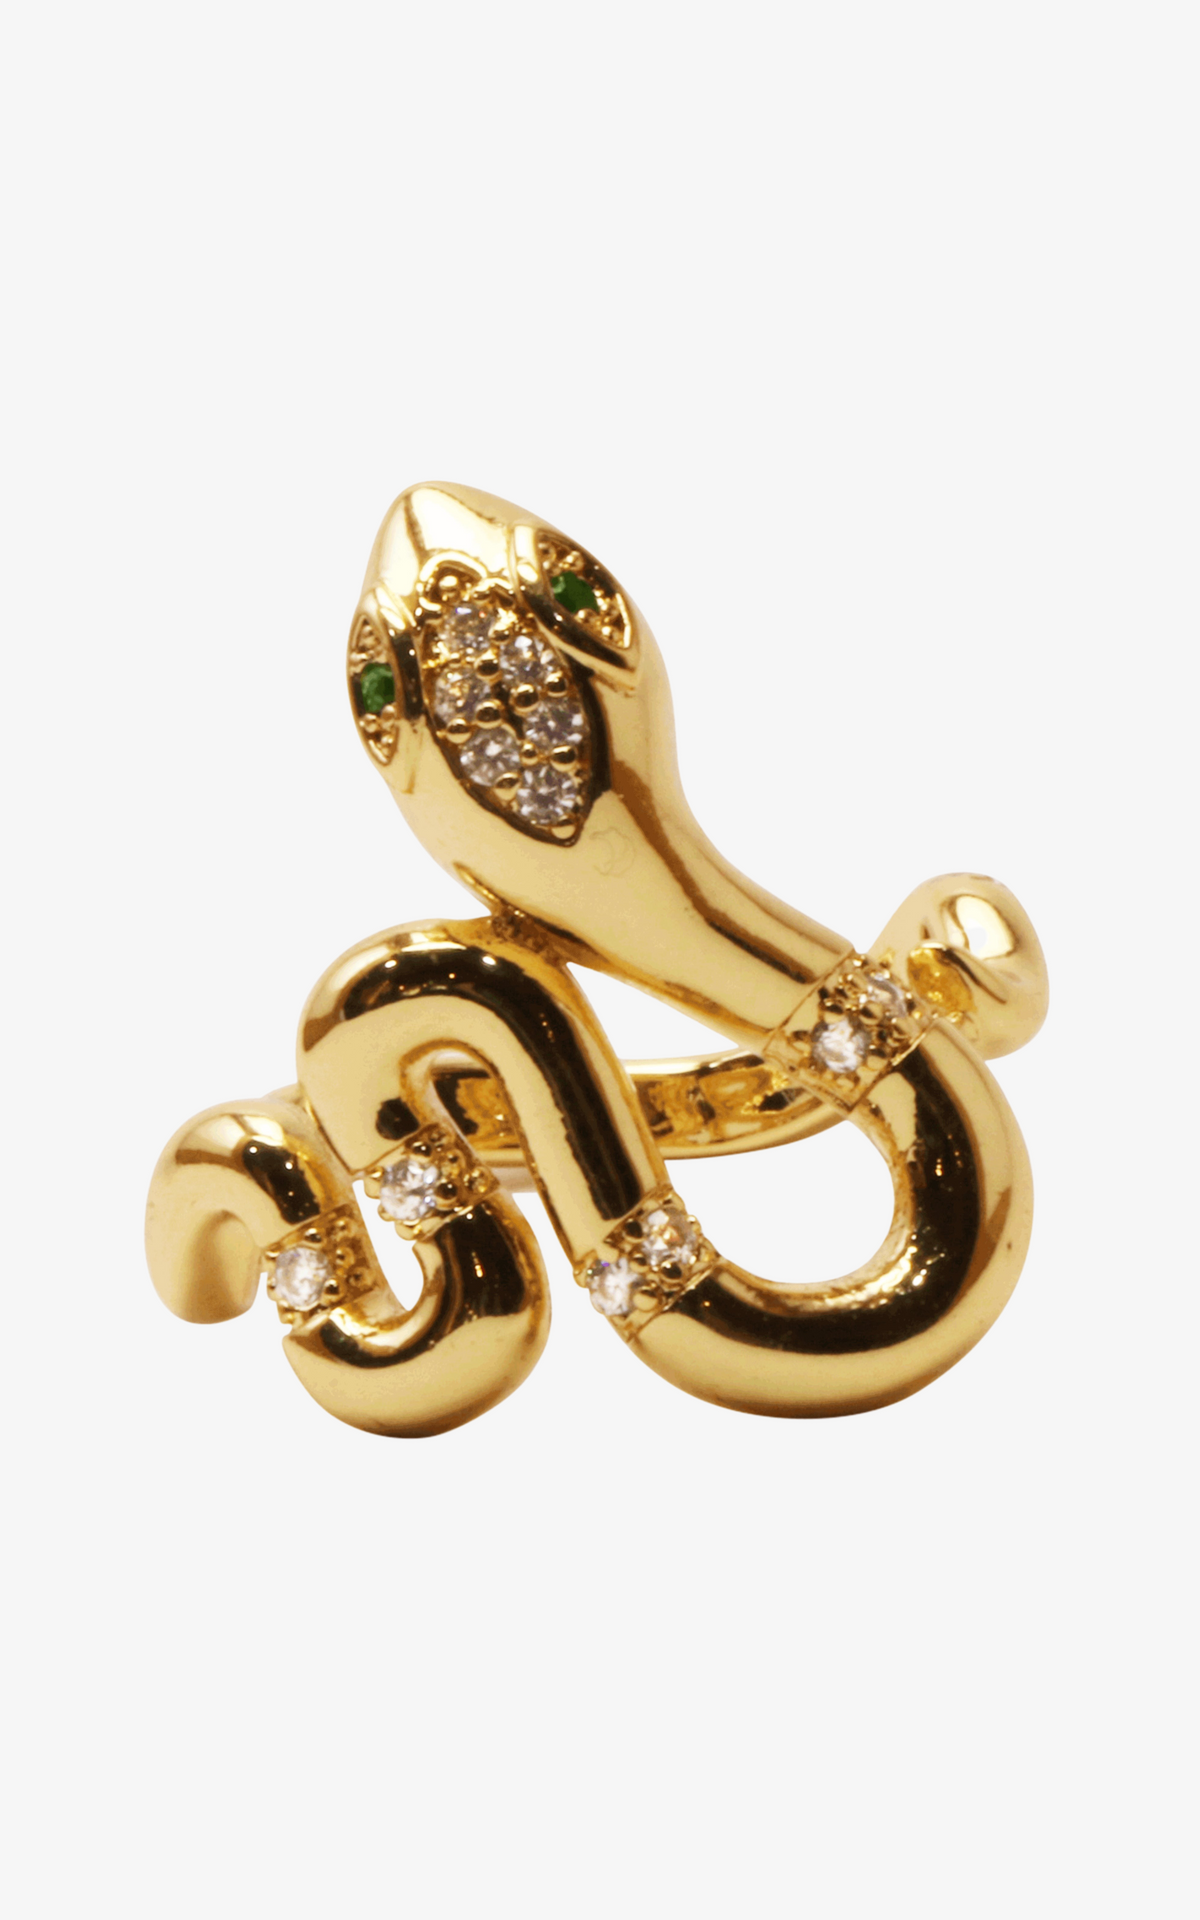 Snake Ring With Jeweled Line Details